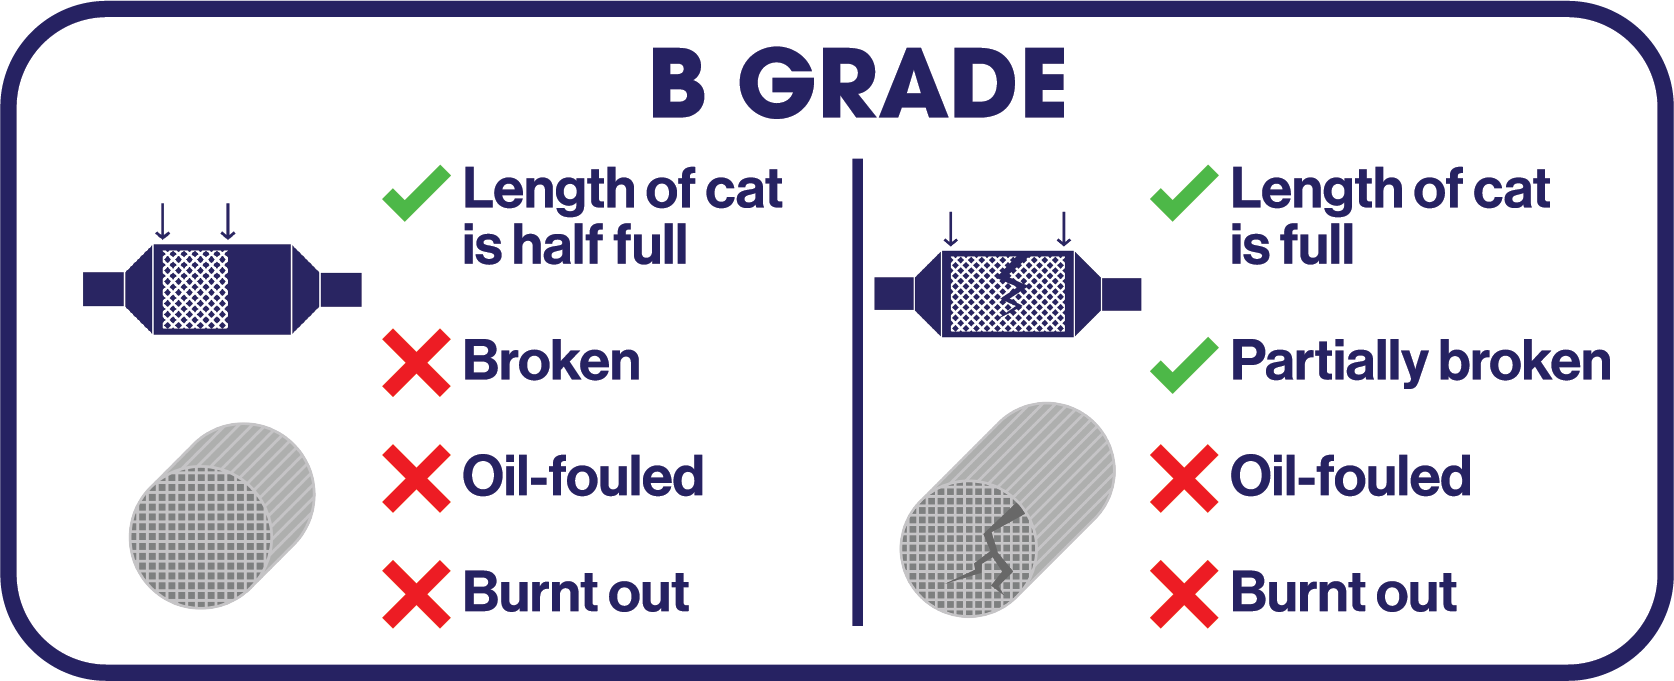 An infographic of Grade B Catalytic Converters